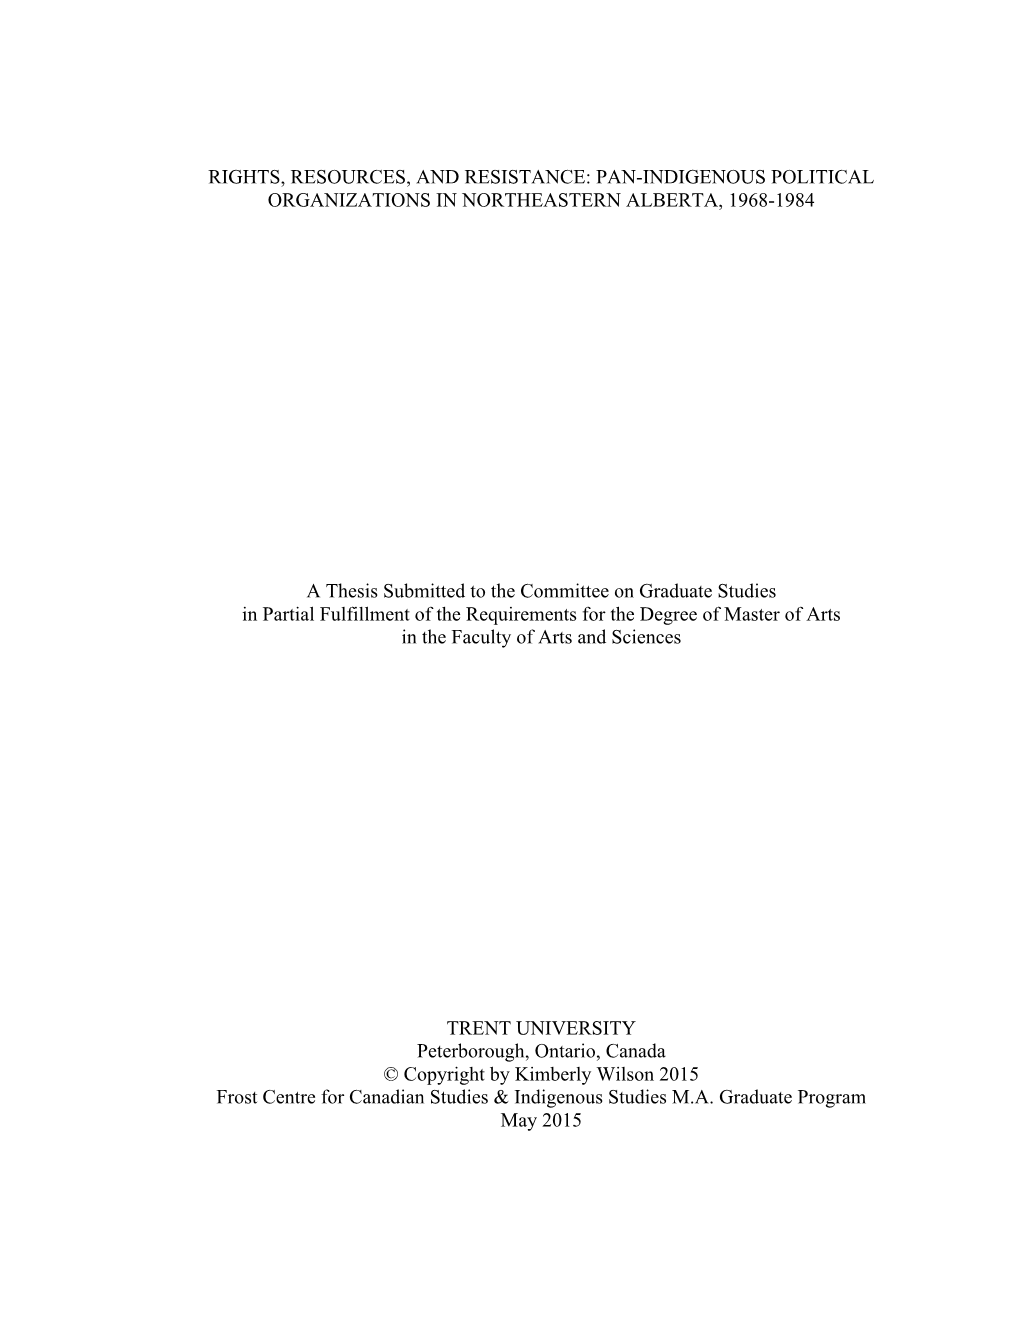 PAN-INDIGENOUS POLITICAL ORGANIZATIONS in NORTHEASTERN ALBERTA, 1968-1984 a Thesis Submitted